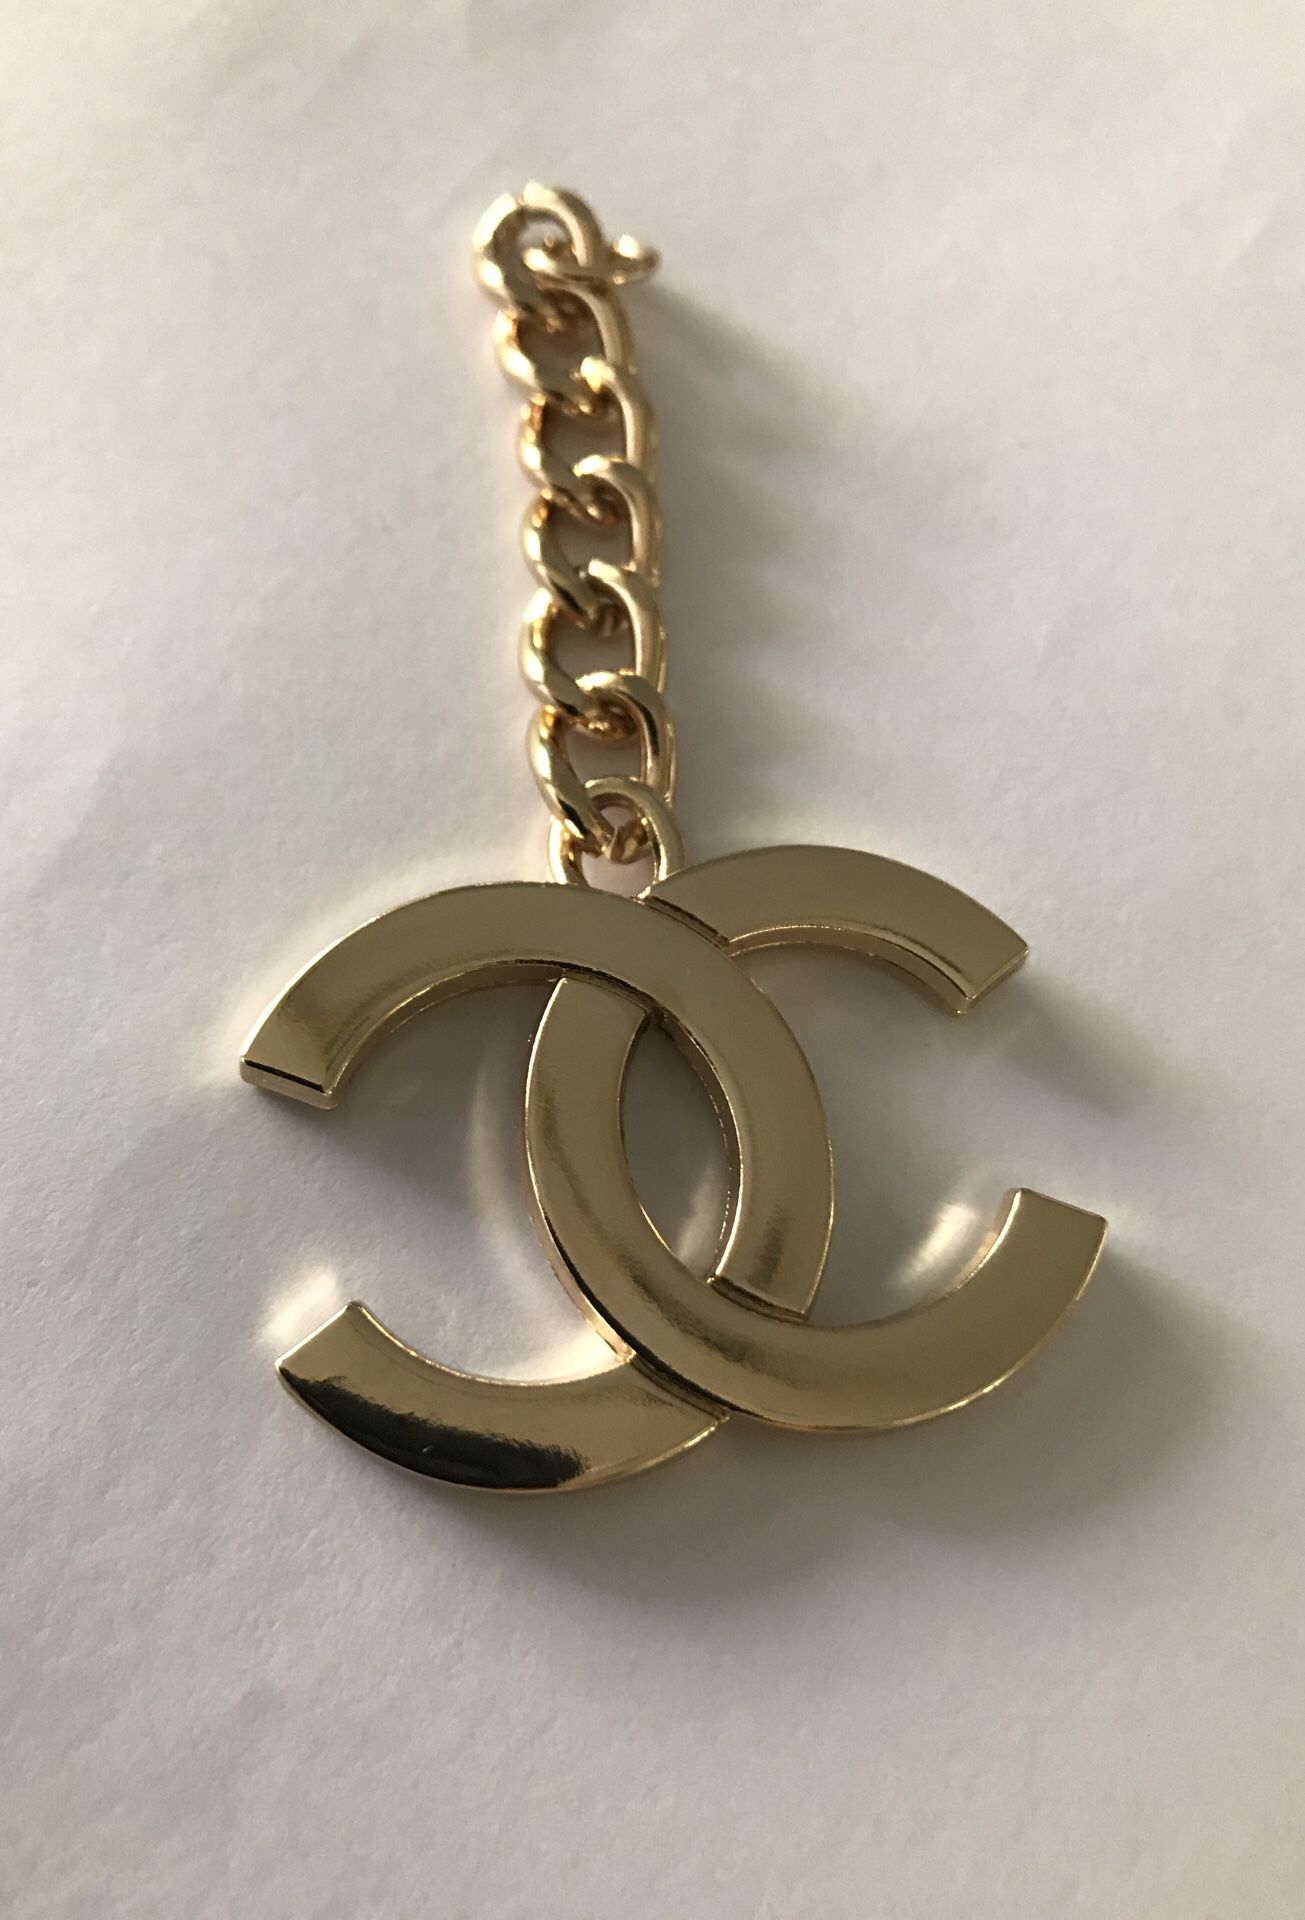 Chanel zipper Pull for Sale in Stafford, TX - OfferUp